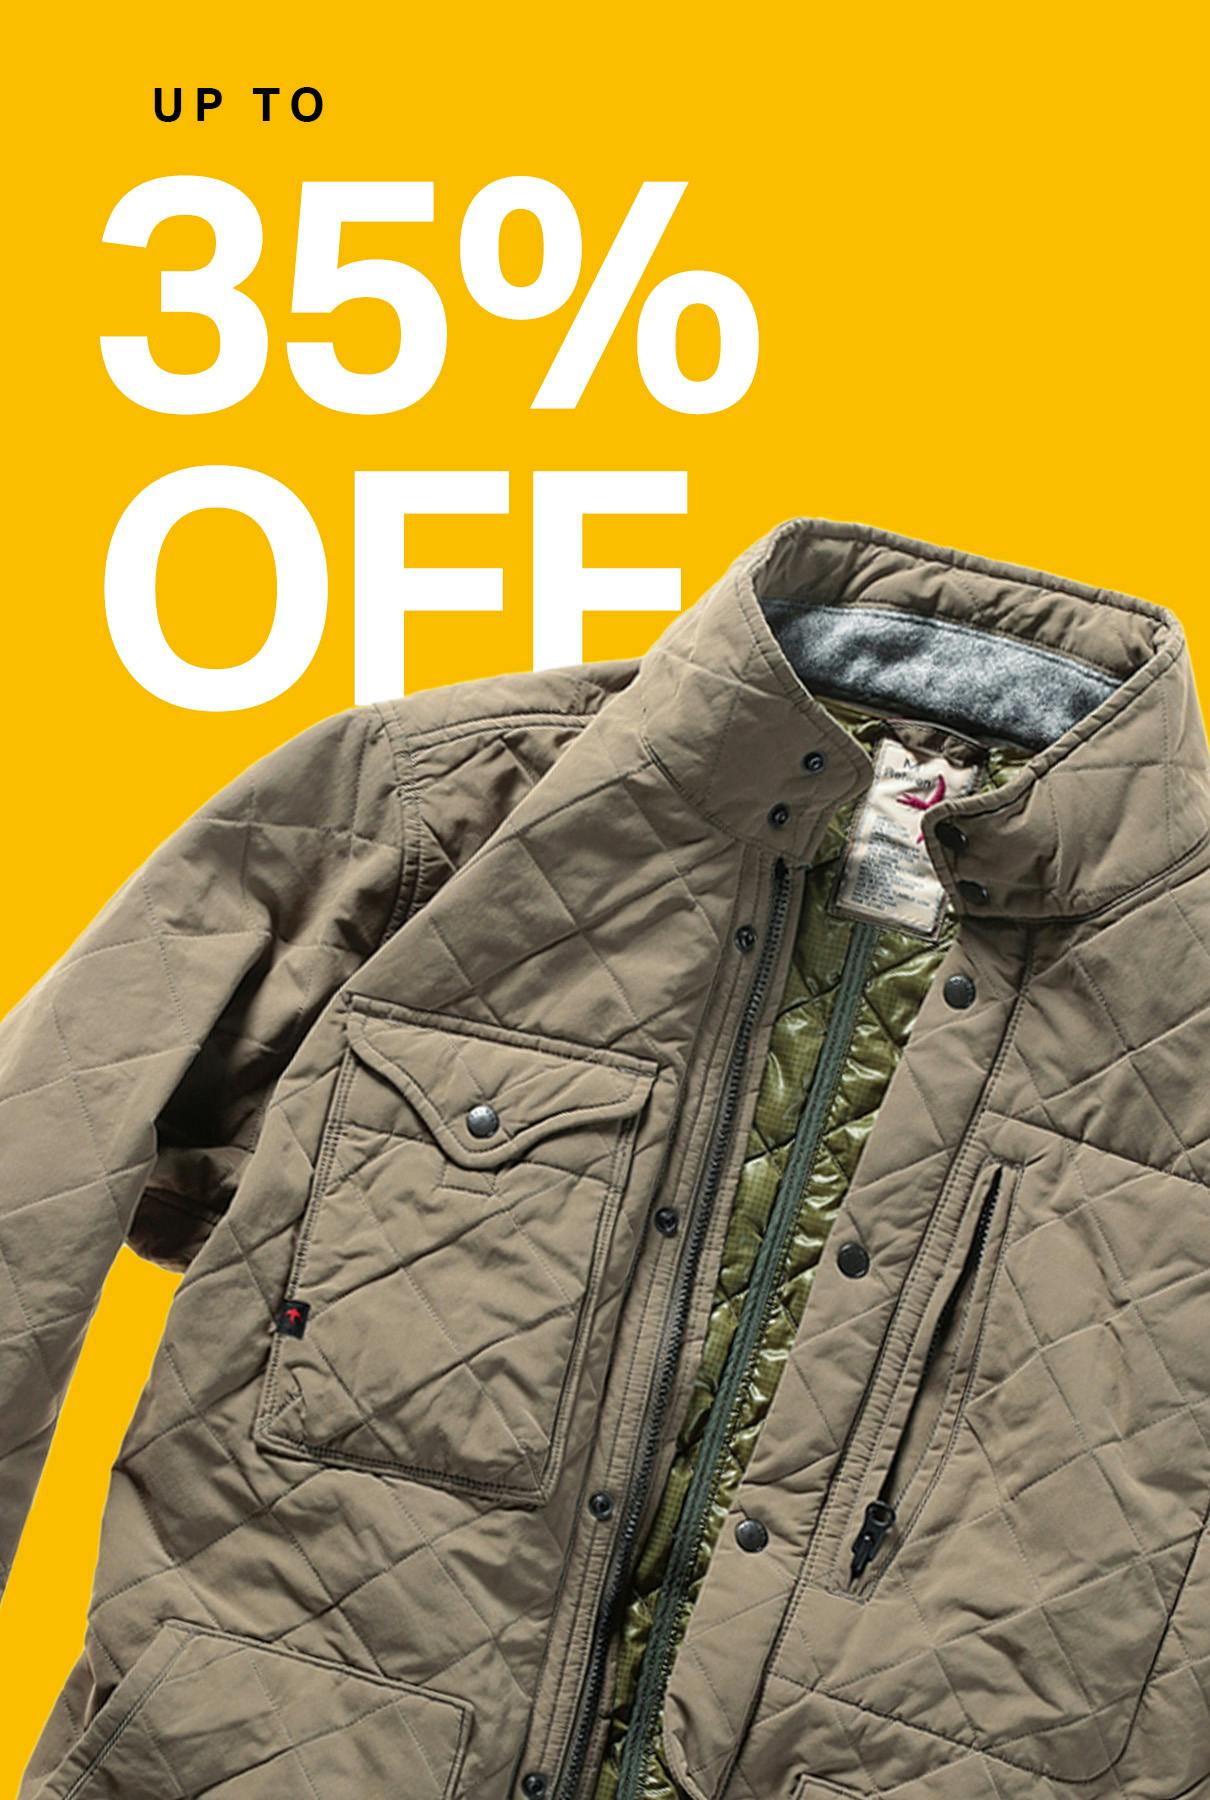 Up to 35% OFF